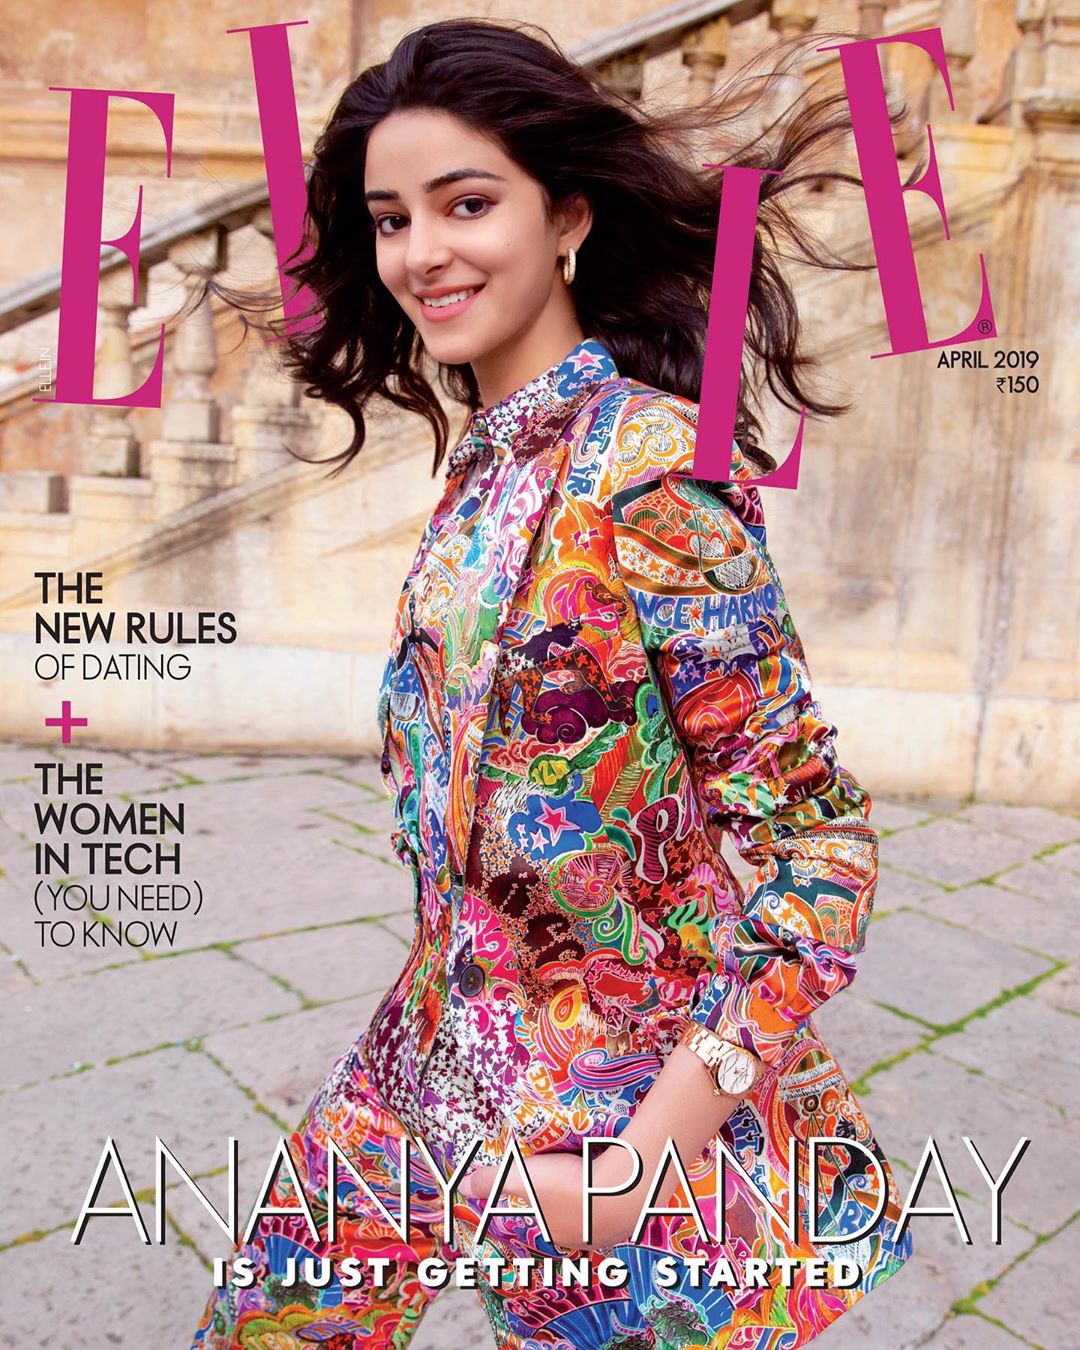 Ananya pandey has become the first Indian teenage sensation to have 3 simultaneous covers of a single magazine issue!